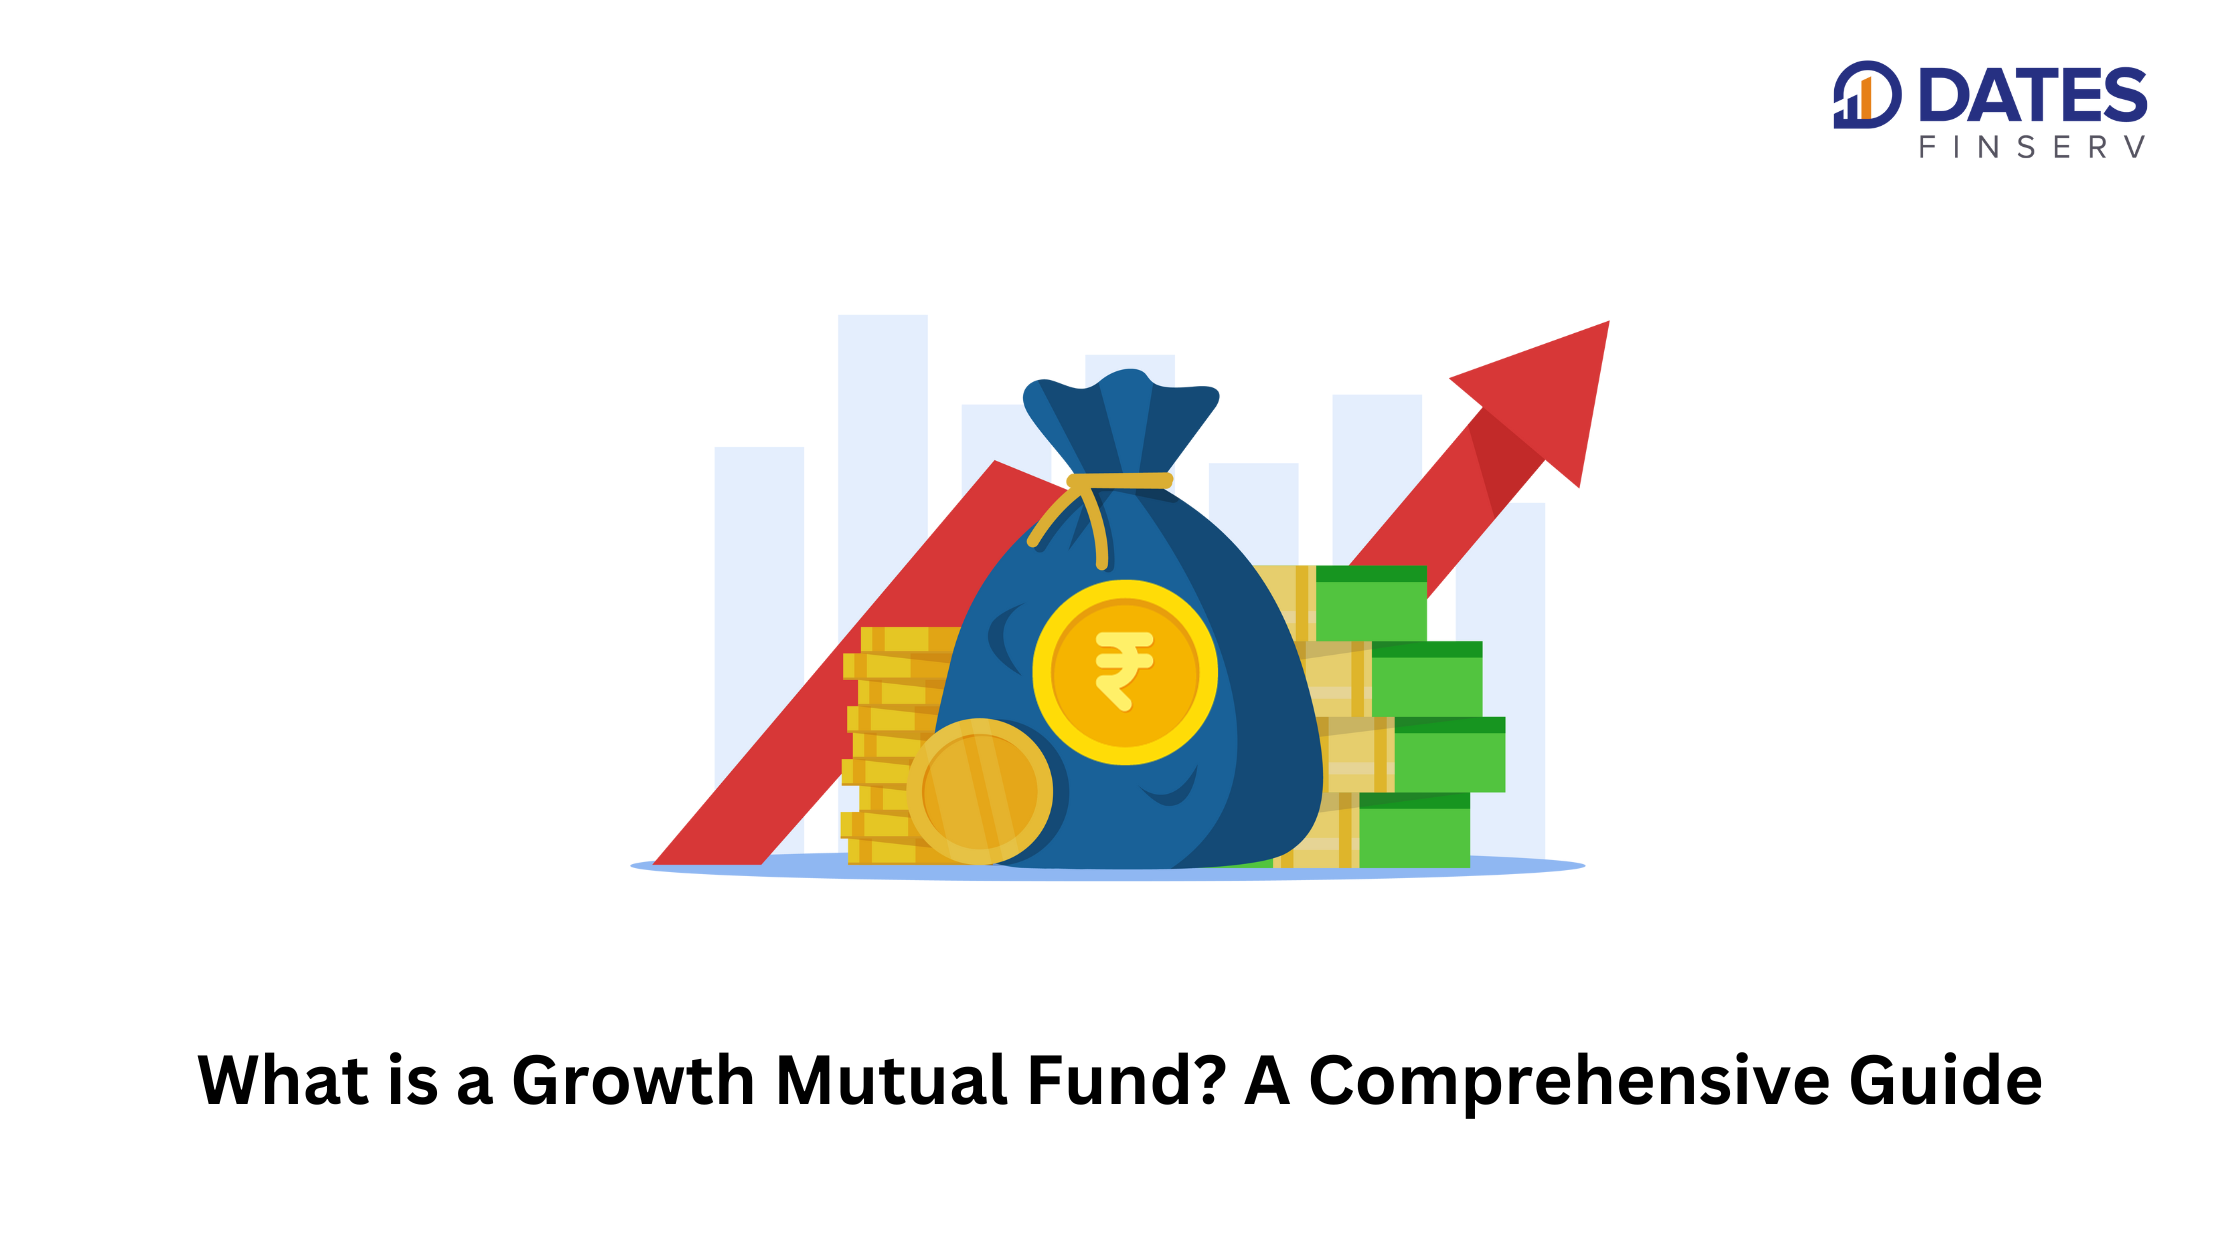 What is growth mutual fund? A comprehensive guide for beginners